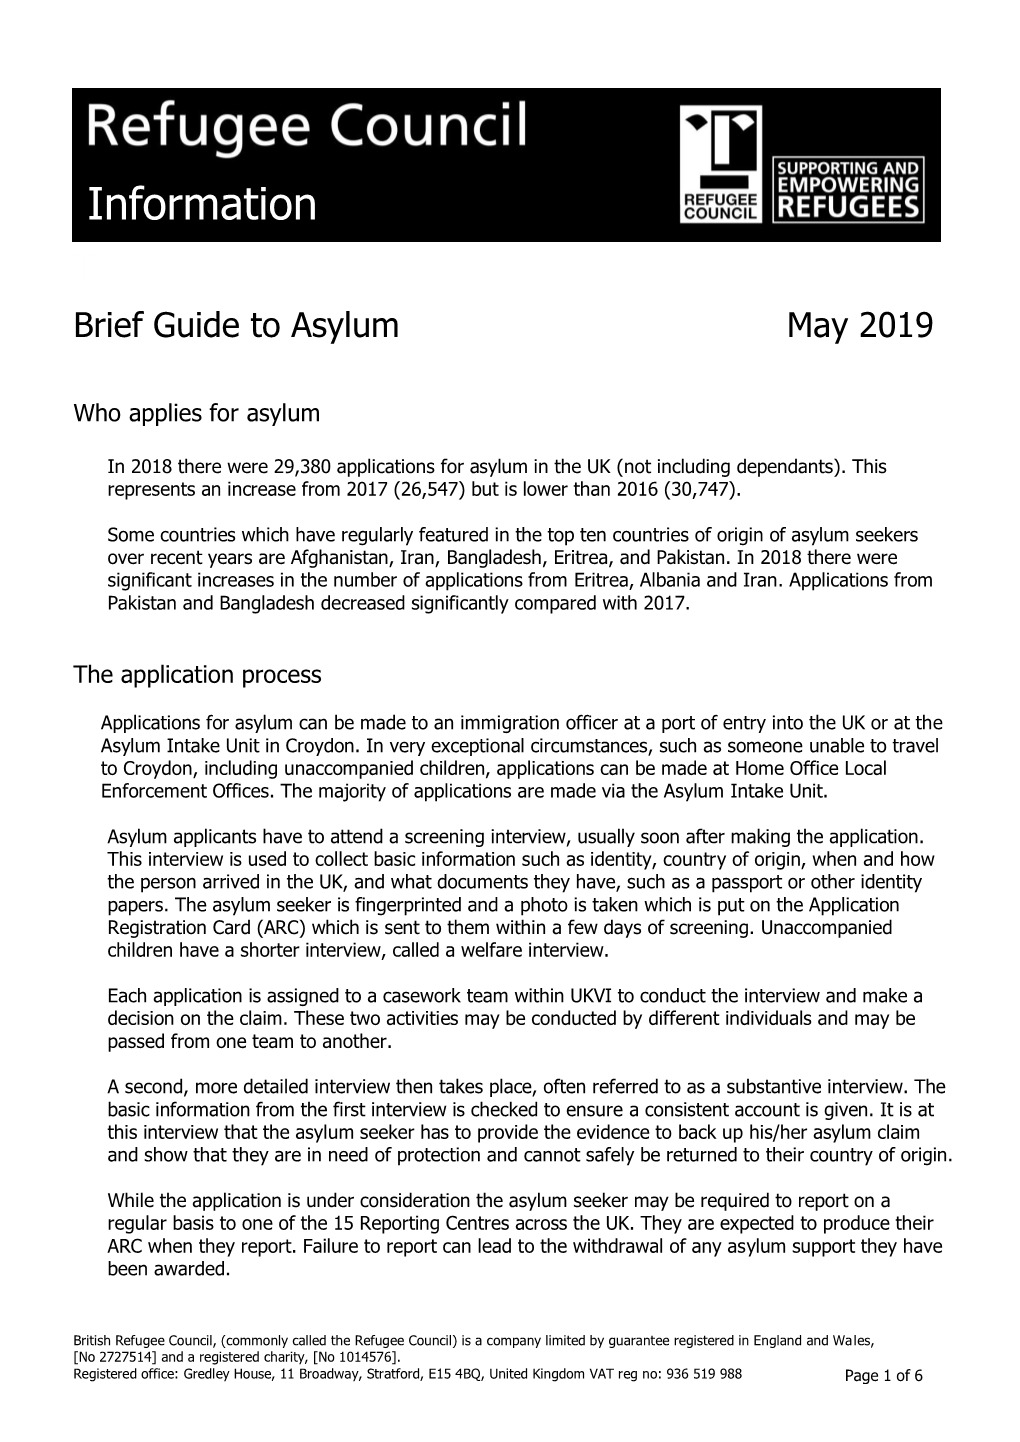 Guide to Asylum May 2019